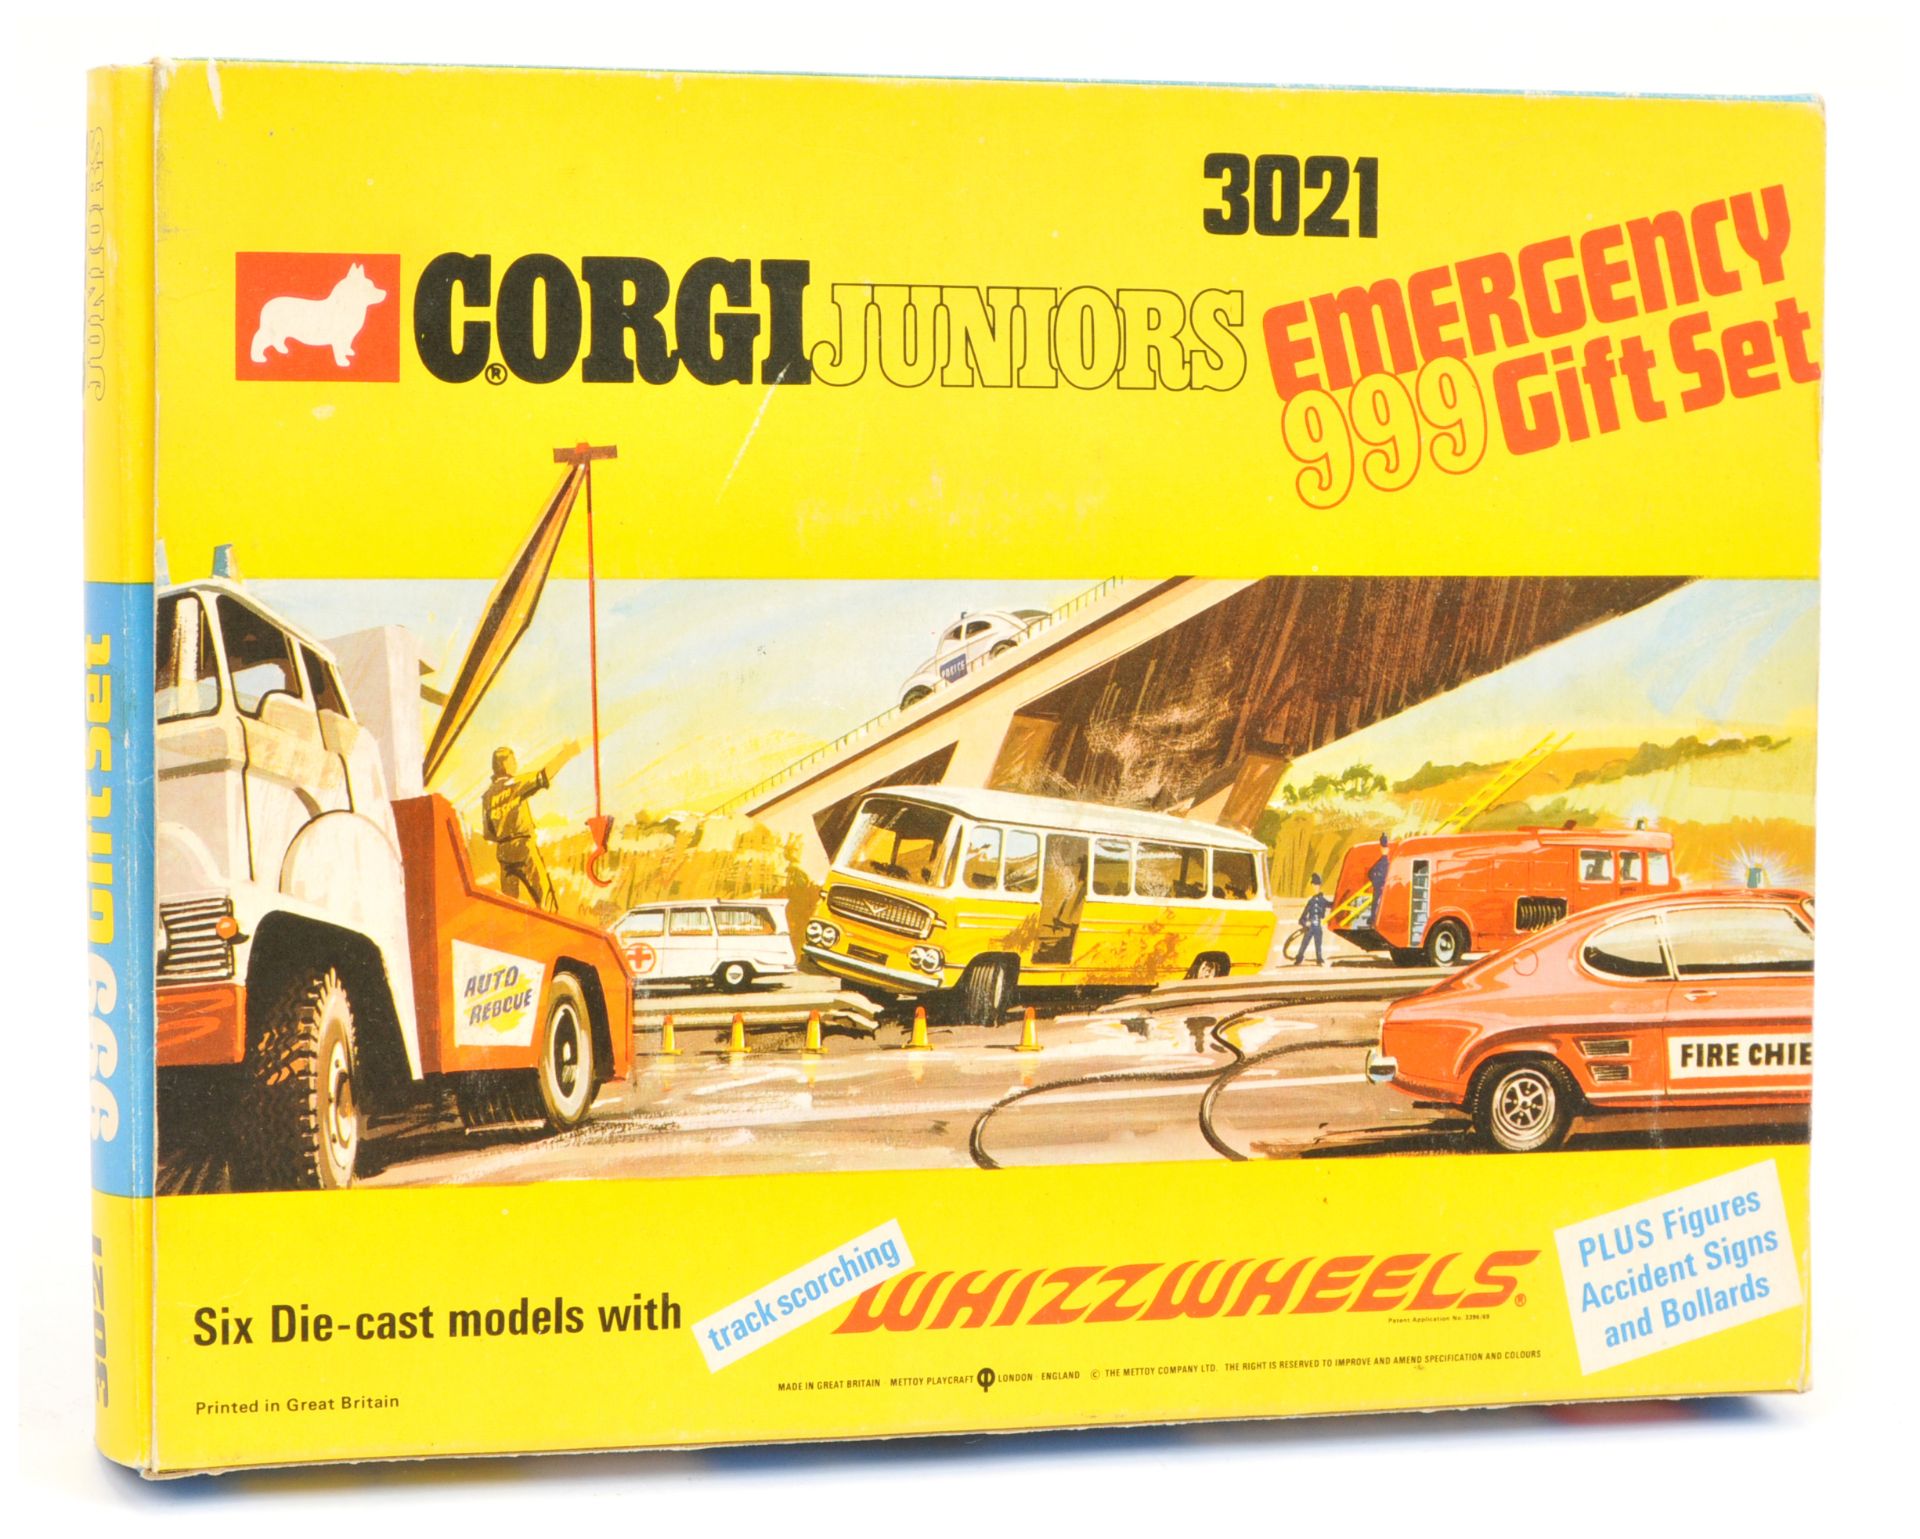 Corgi Toys Juniors 3021 "Emergency 999" Gift Set To Include 6 Pieces - Ford Holmes Wrecker, Ford ... - Bild 2 aus 2